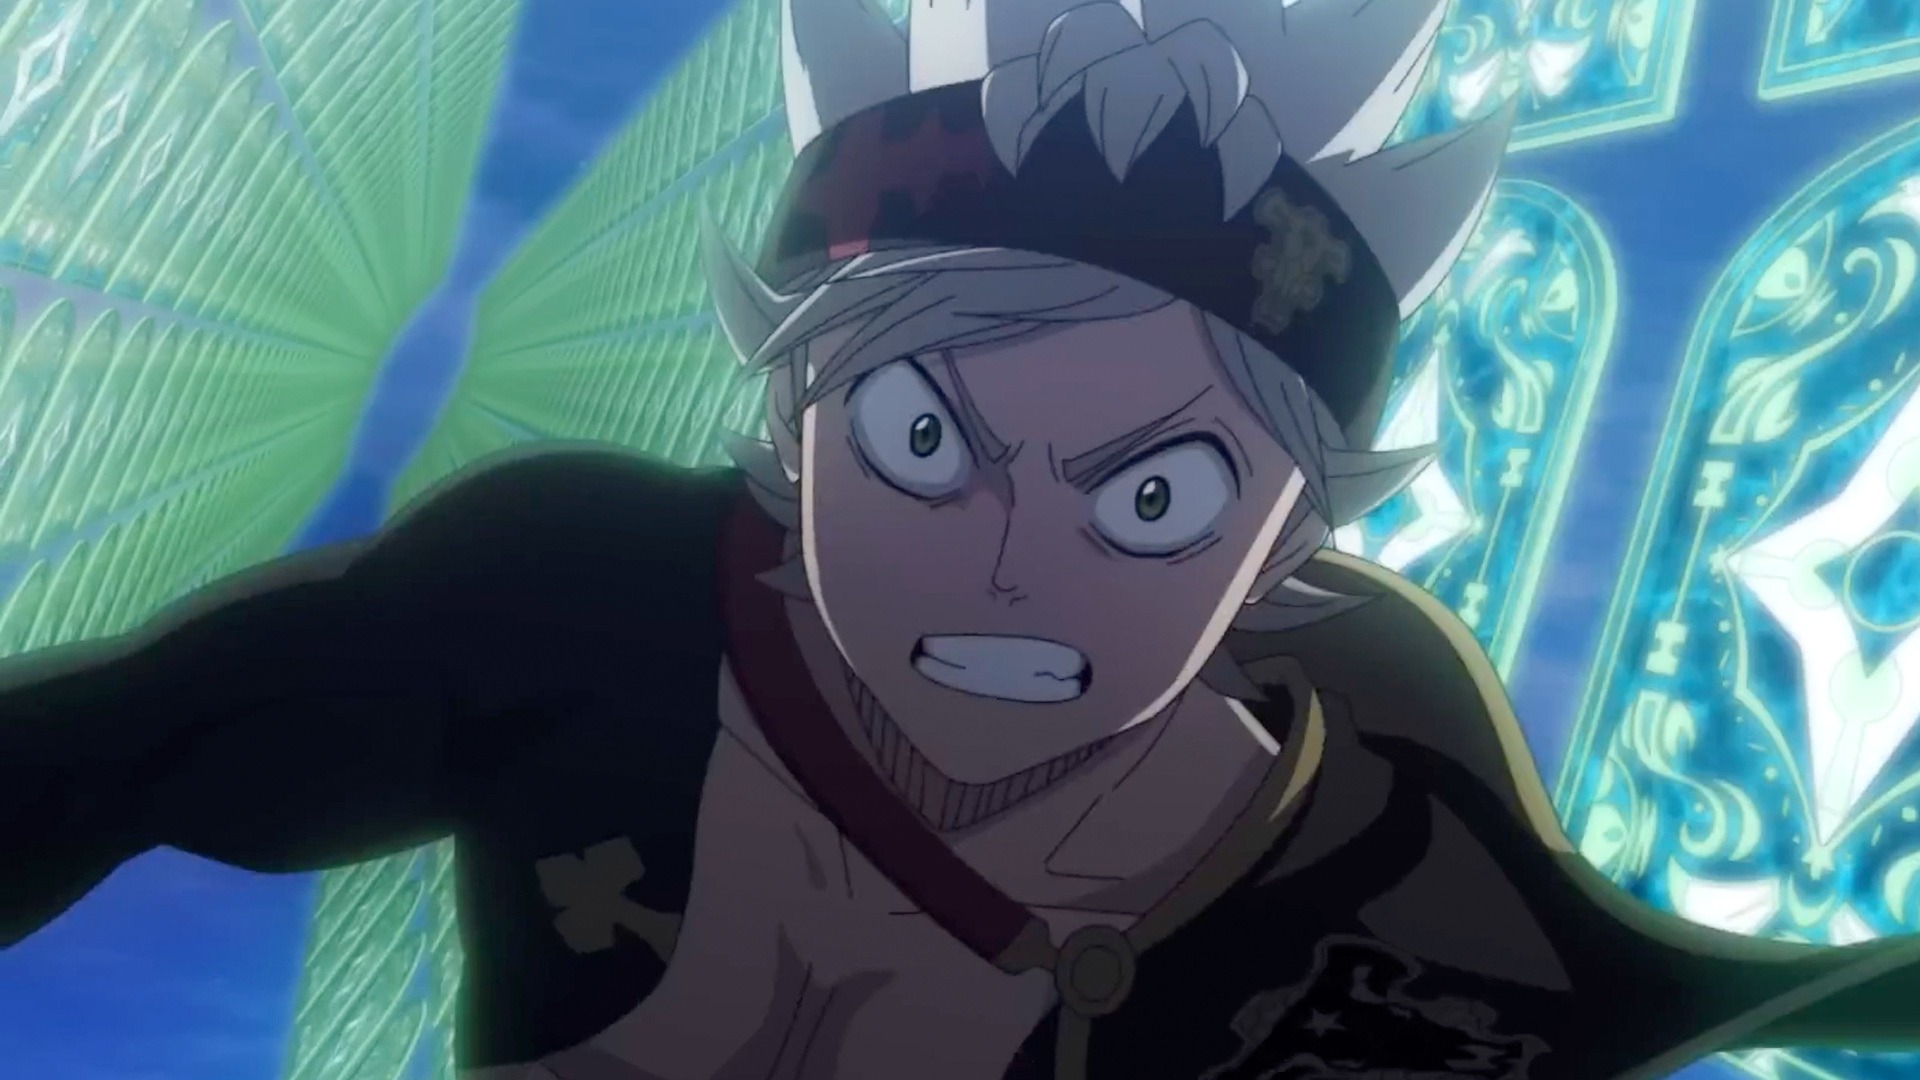 Black Clover: Sword of the Wizard King – Análise